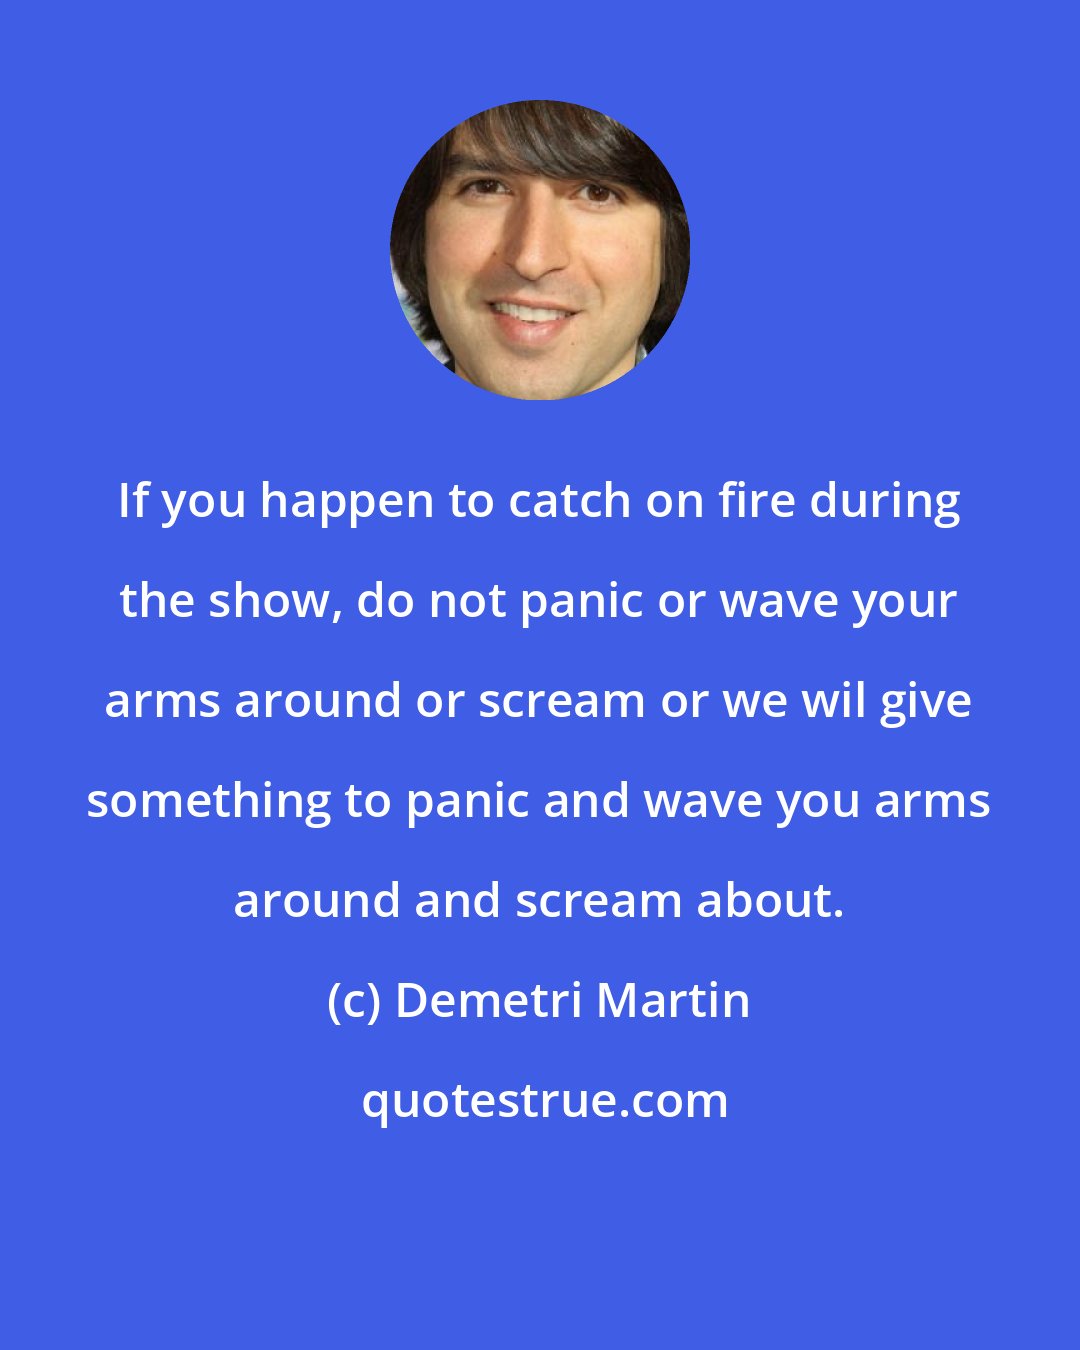 Demetri Martin: If you happen to catch on fire during the show, do not panic or wave your arms around or scream or we wil give something to panic and wave you arms around and scream about.